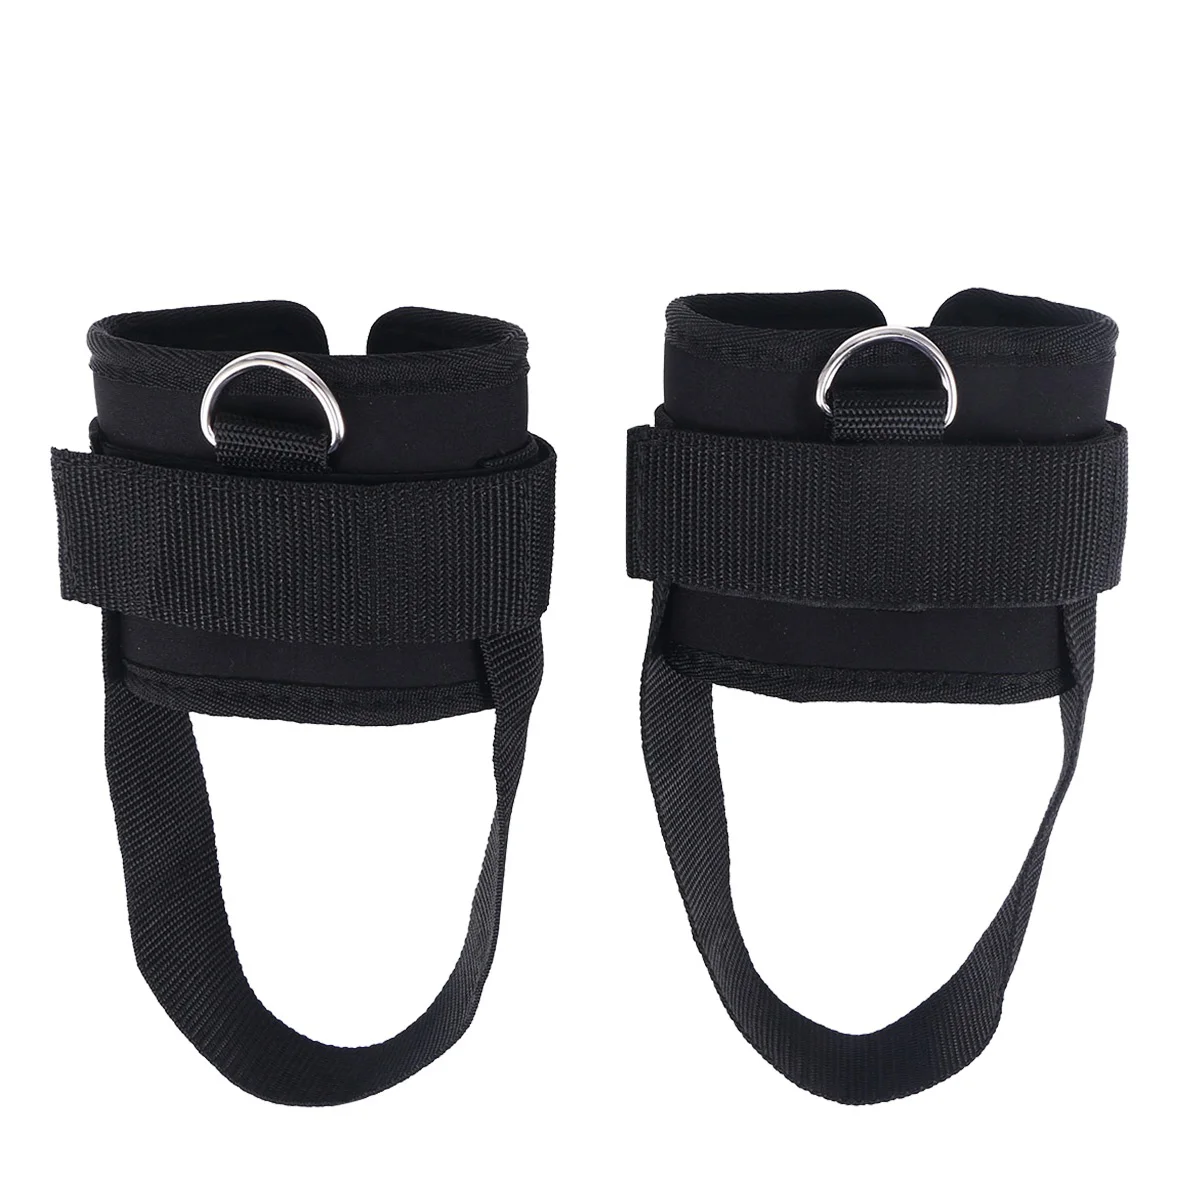 

Ankle Strap Cuffs Exercise Padded Leg Straps Cuffcable Support Workout Protectormachine Stabilizer Kickback Adjustable Fitness